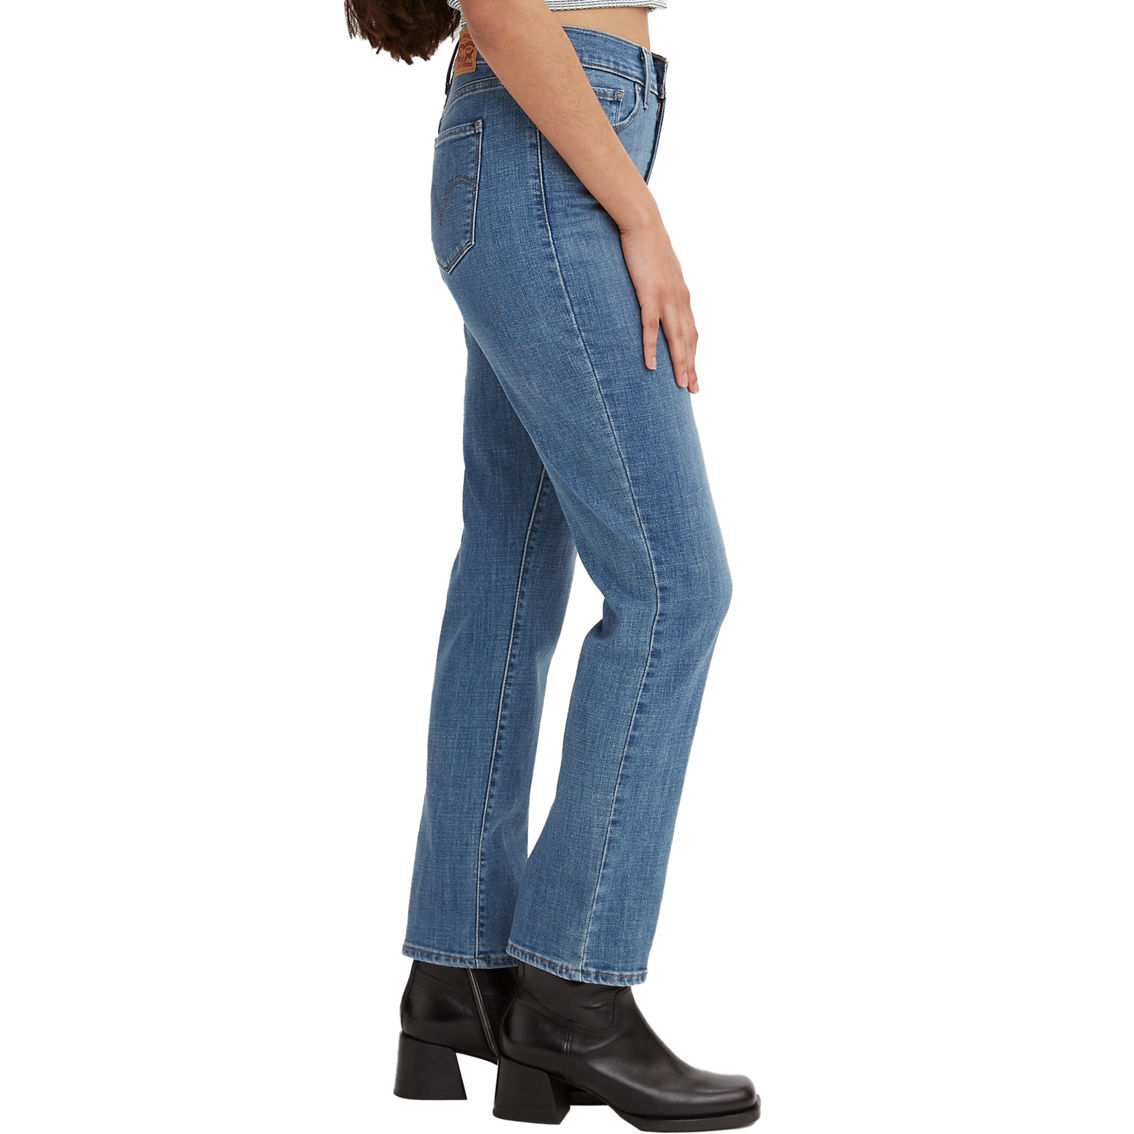 Levi's Classic Straight Jeans - Image 2 of 2